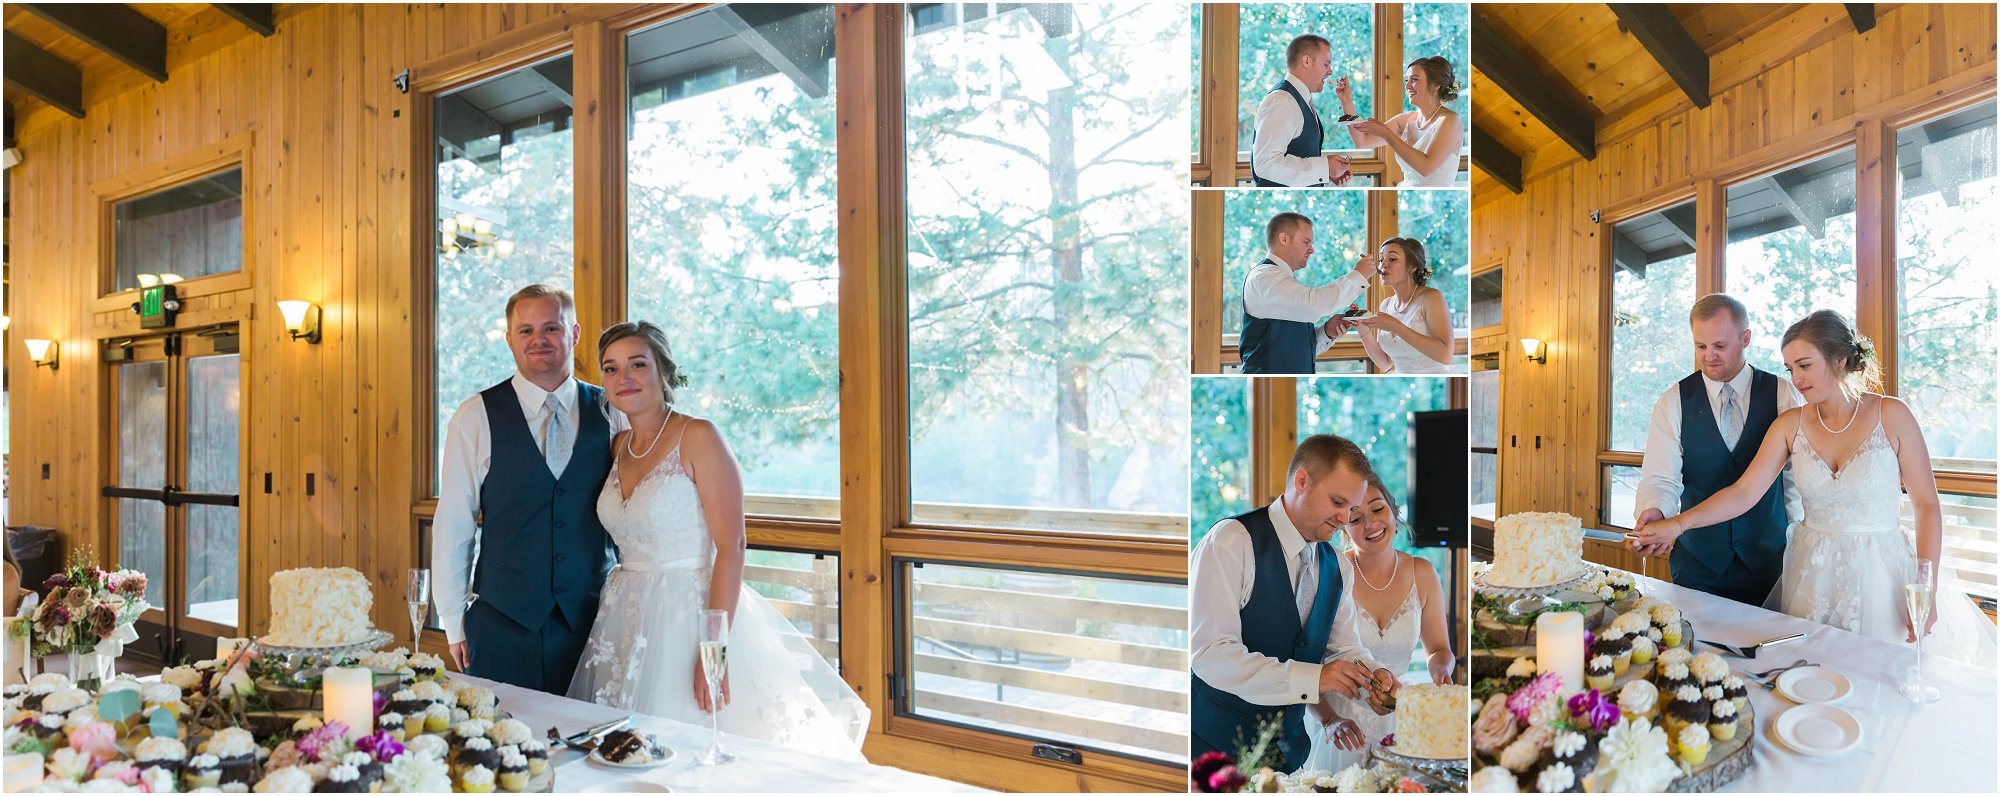 The happy couple cuts their Ida's Cupcake Cafe wedding cake before guests dine on delicious cupcakes at Rock Springs Ranch in Central Oregon. | Erica Swantek Photography